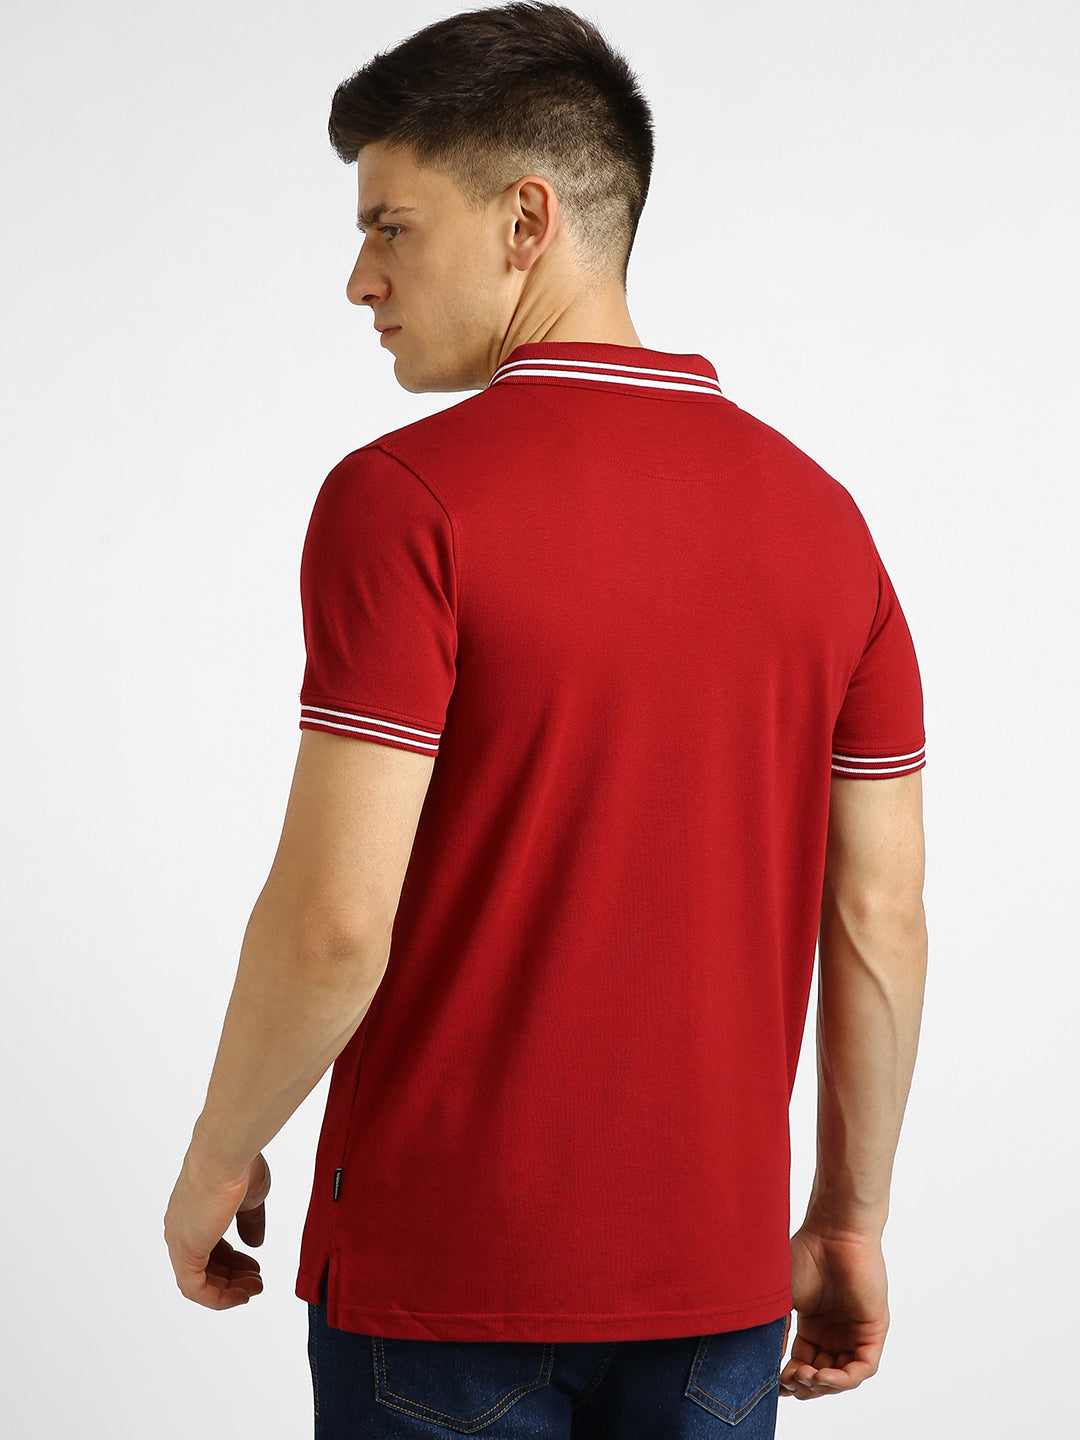 Men's Red Solid Slim Fit Half Sleeve Cotton Polo T-Shirt